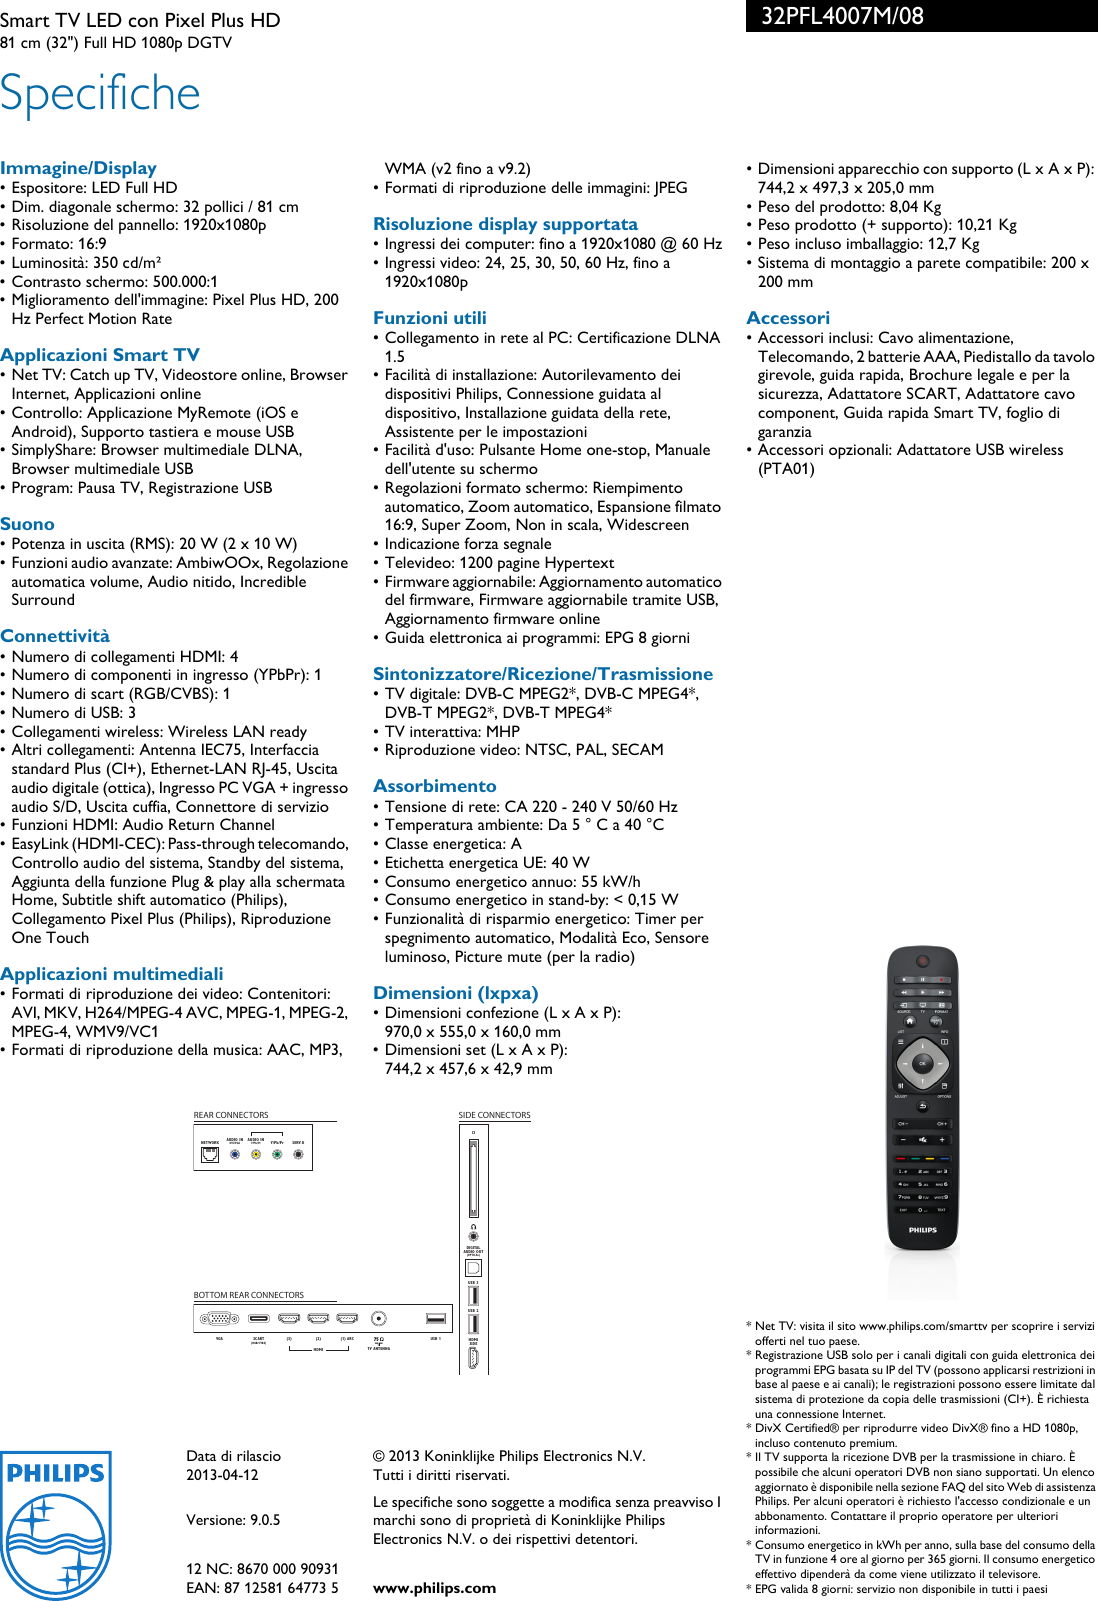 Page 3 of 3 - Philips 32PFL4007M/08 Smart TV LED Con Pixel Plus HD User Manual Scheda Tecnica 32pfl4007m 08 Pss Itait